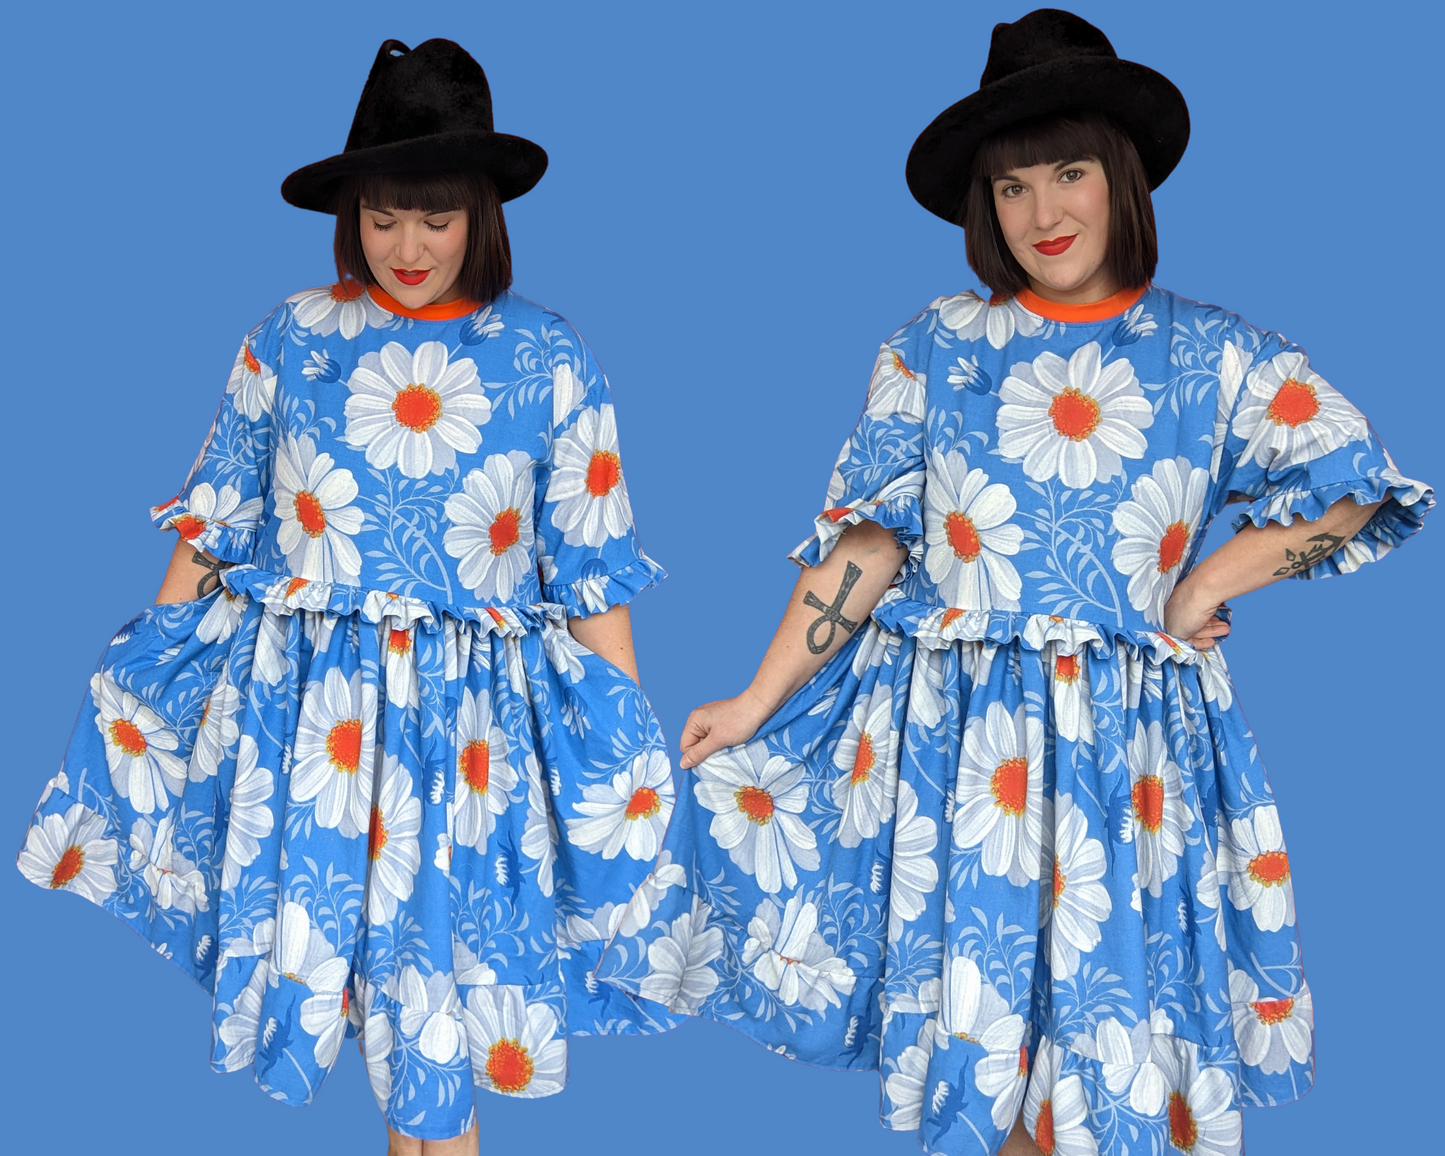 Handmade, Upcycled Vintage 1970's Blue and Daisies Patterned Maxi T-Shirt Dress Fits S-M-L-XL